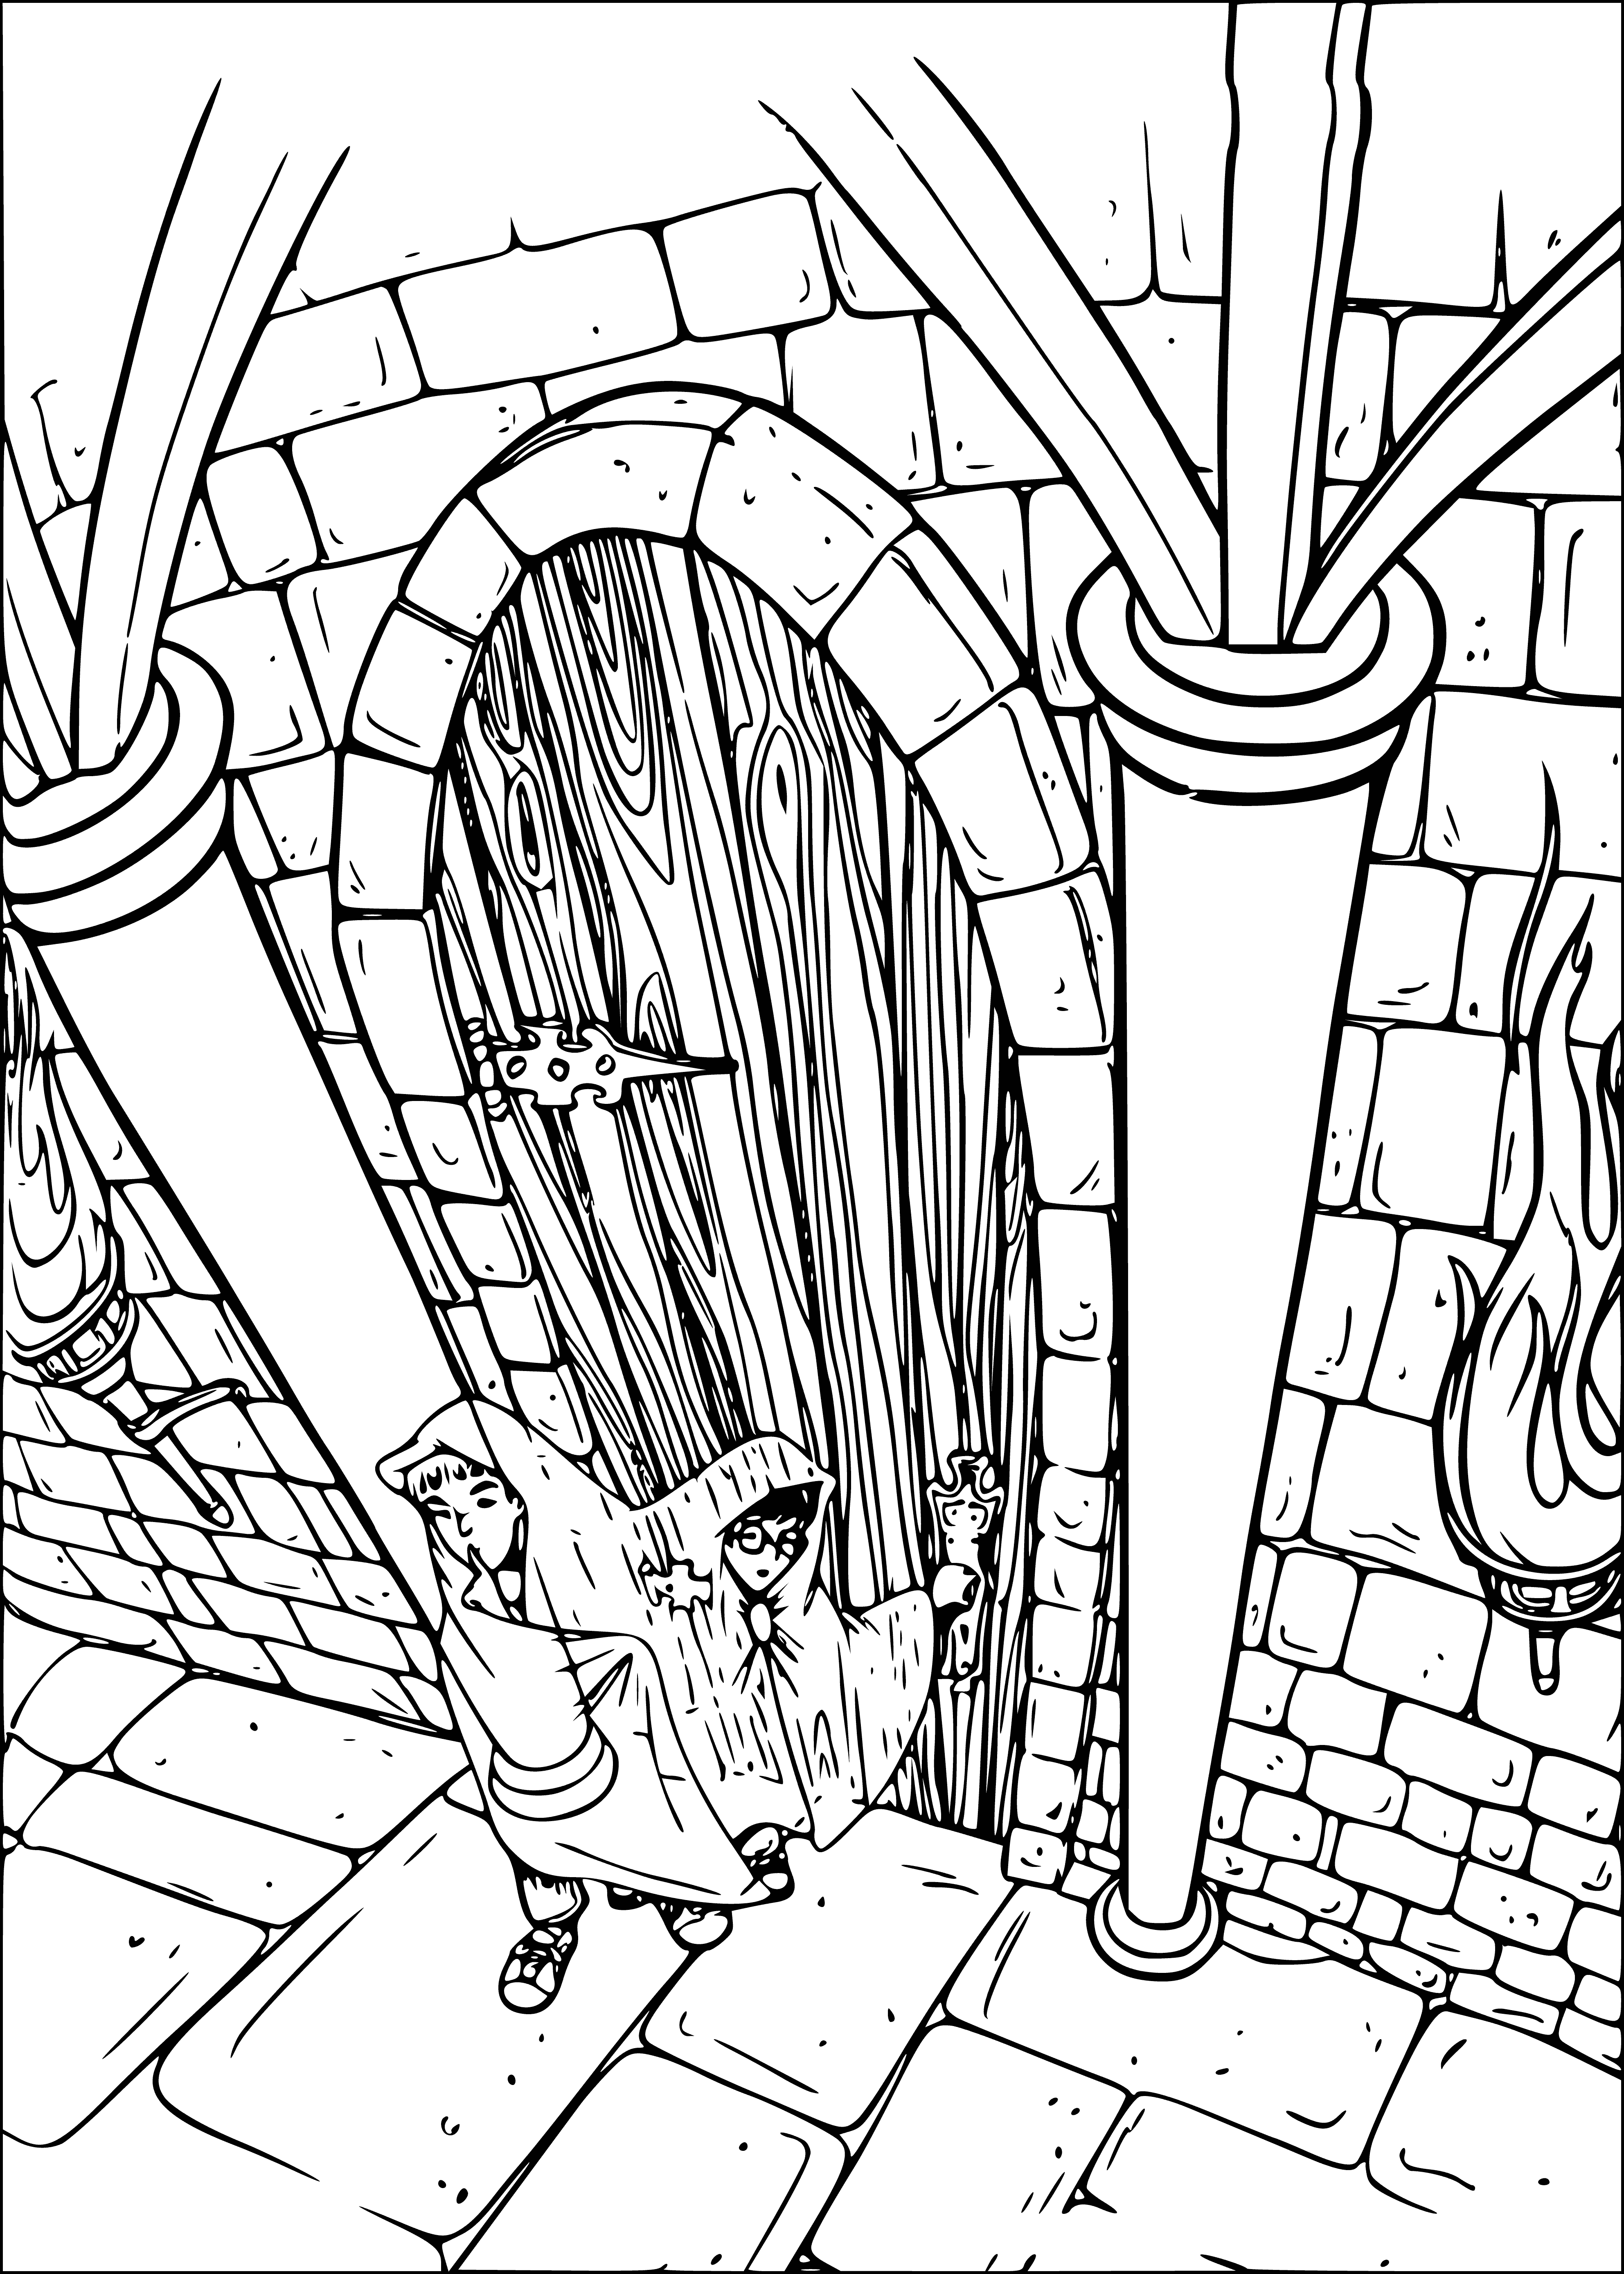 coloring page: Coloring page of a room full of forbidden books of all kinds, young & old people. #HarryPotter #ForbiddenSection